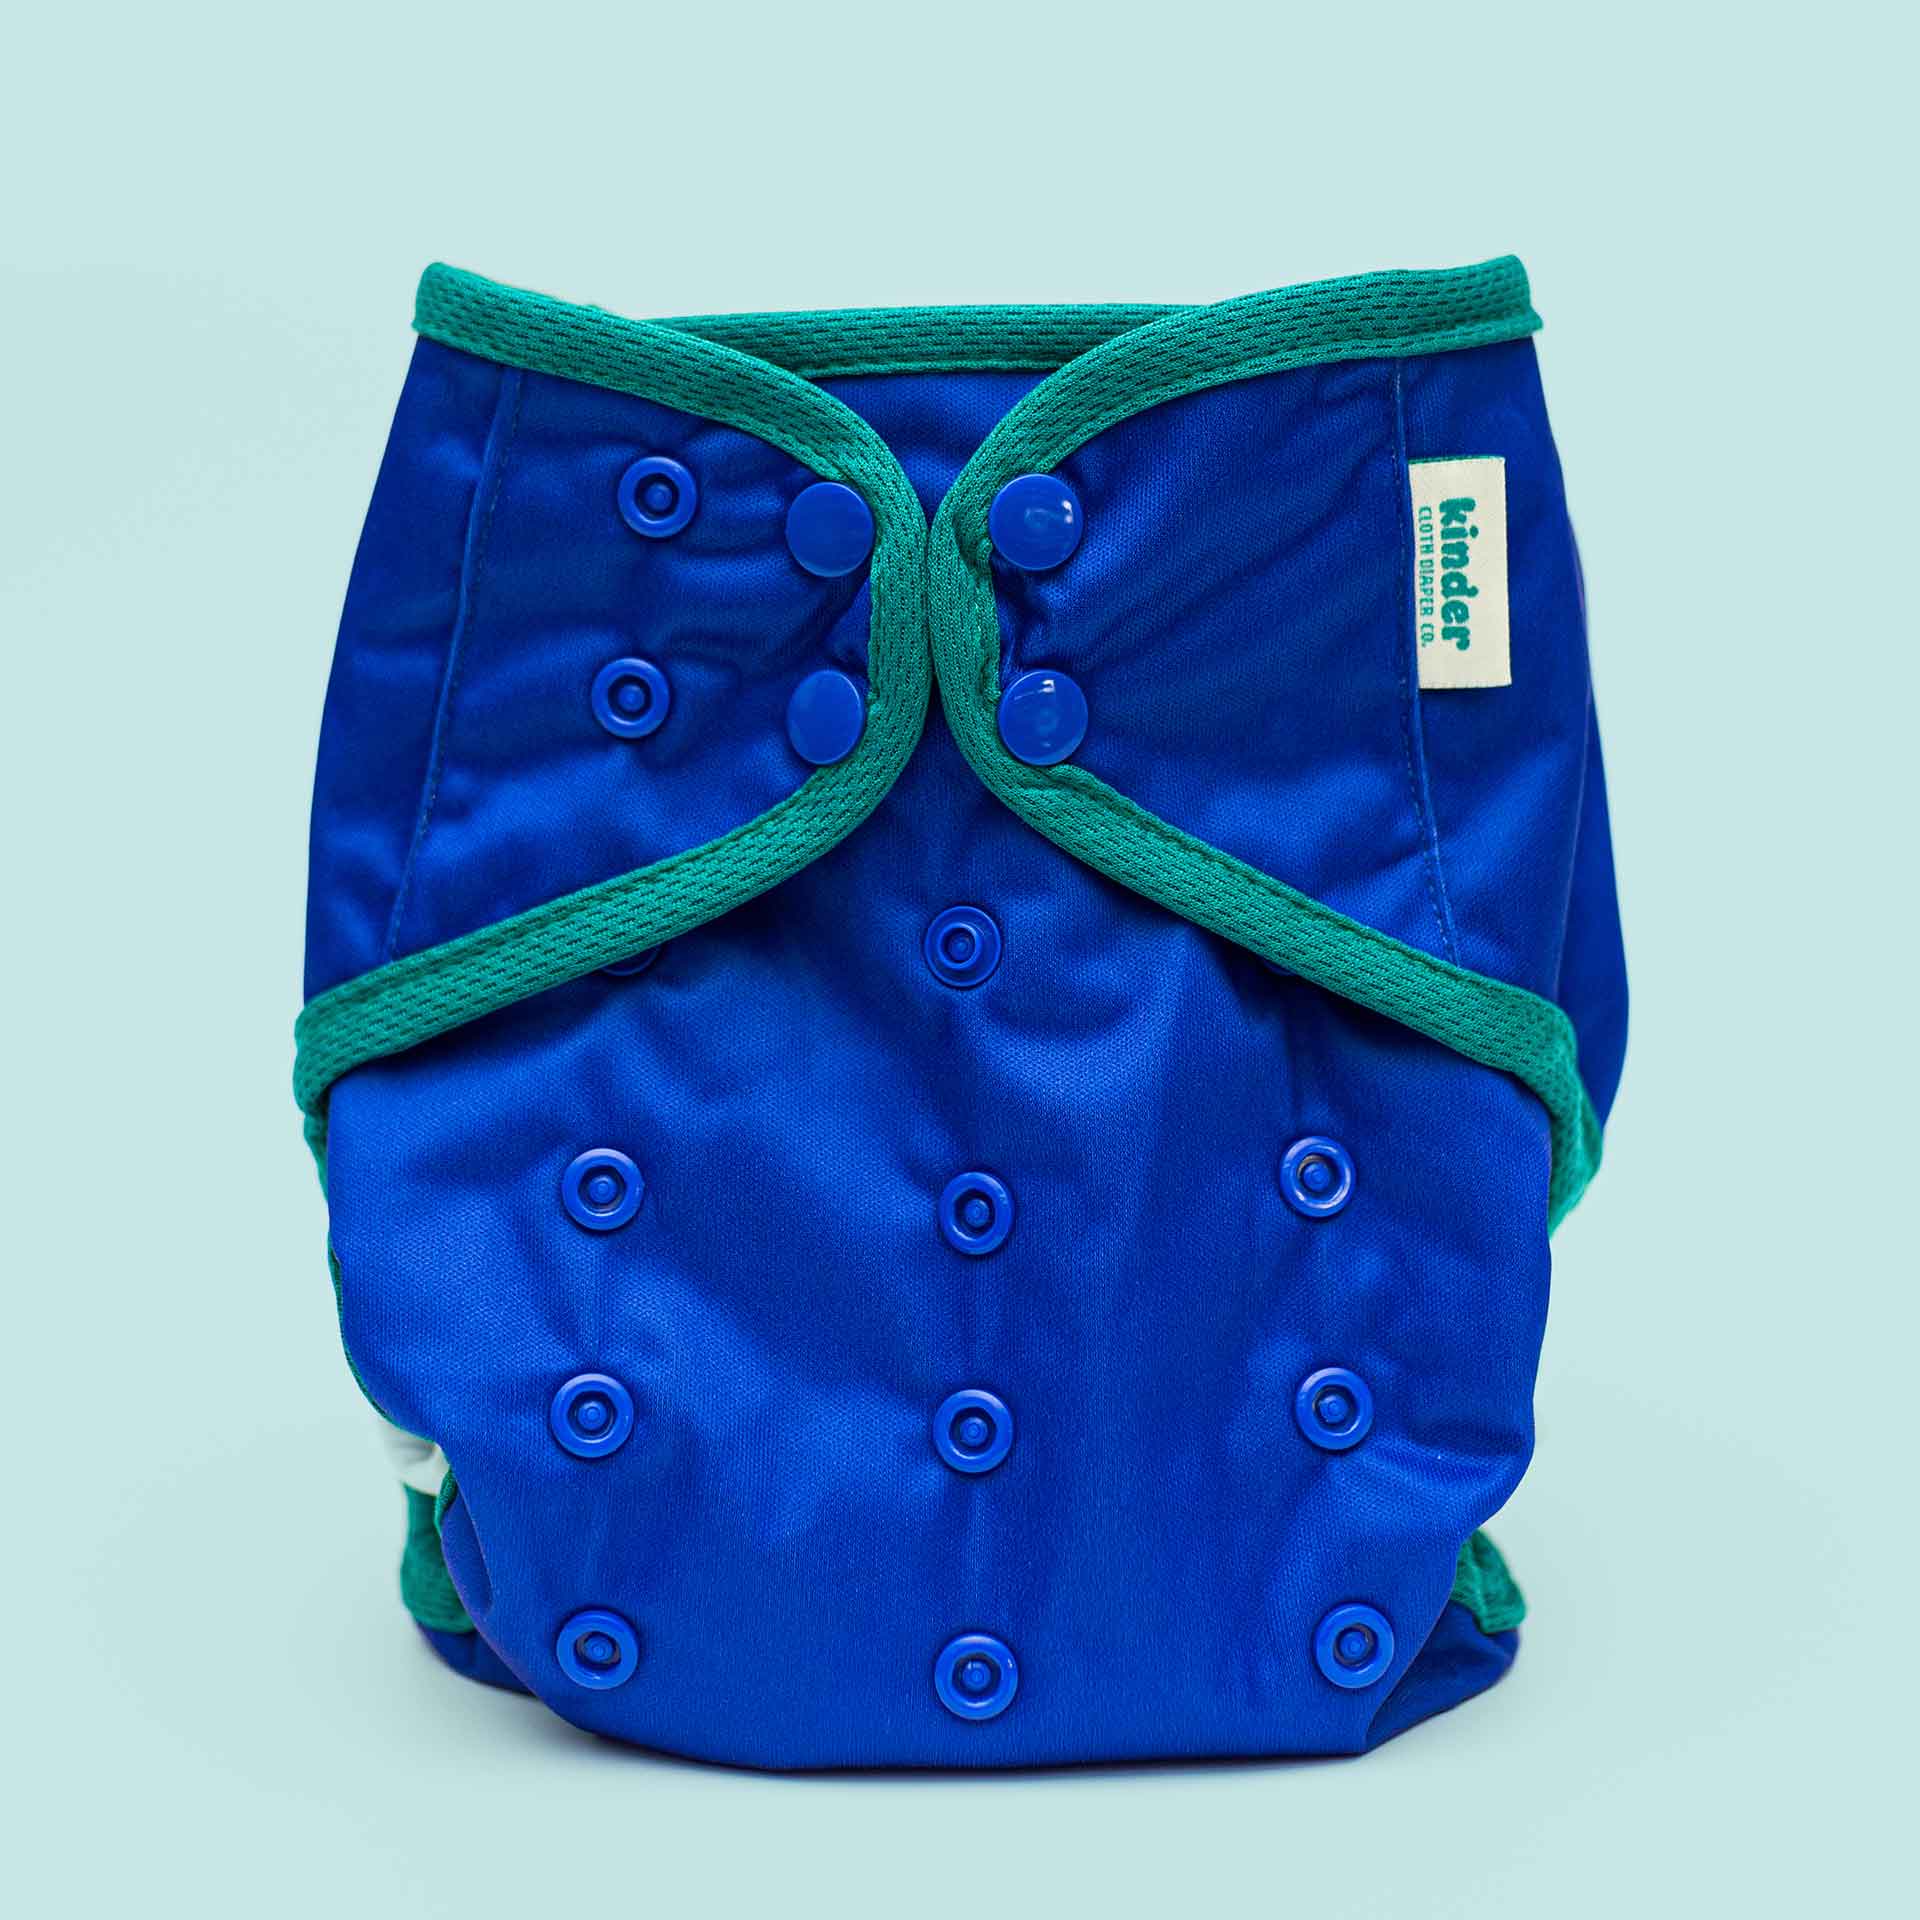 modern reusable diaper cover blue kinder cloth diapers best diaper cover ever pittsburgh usa